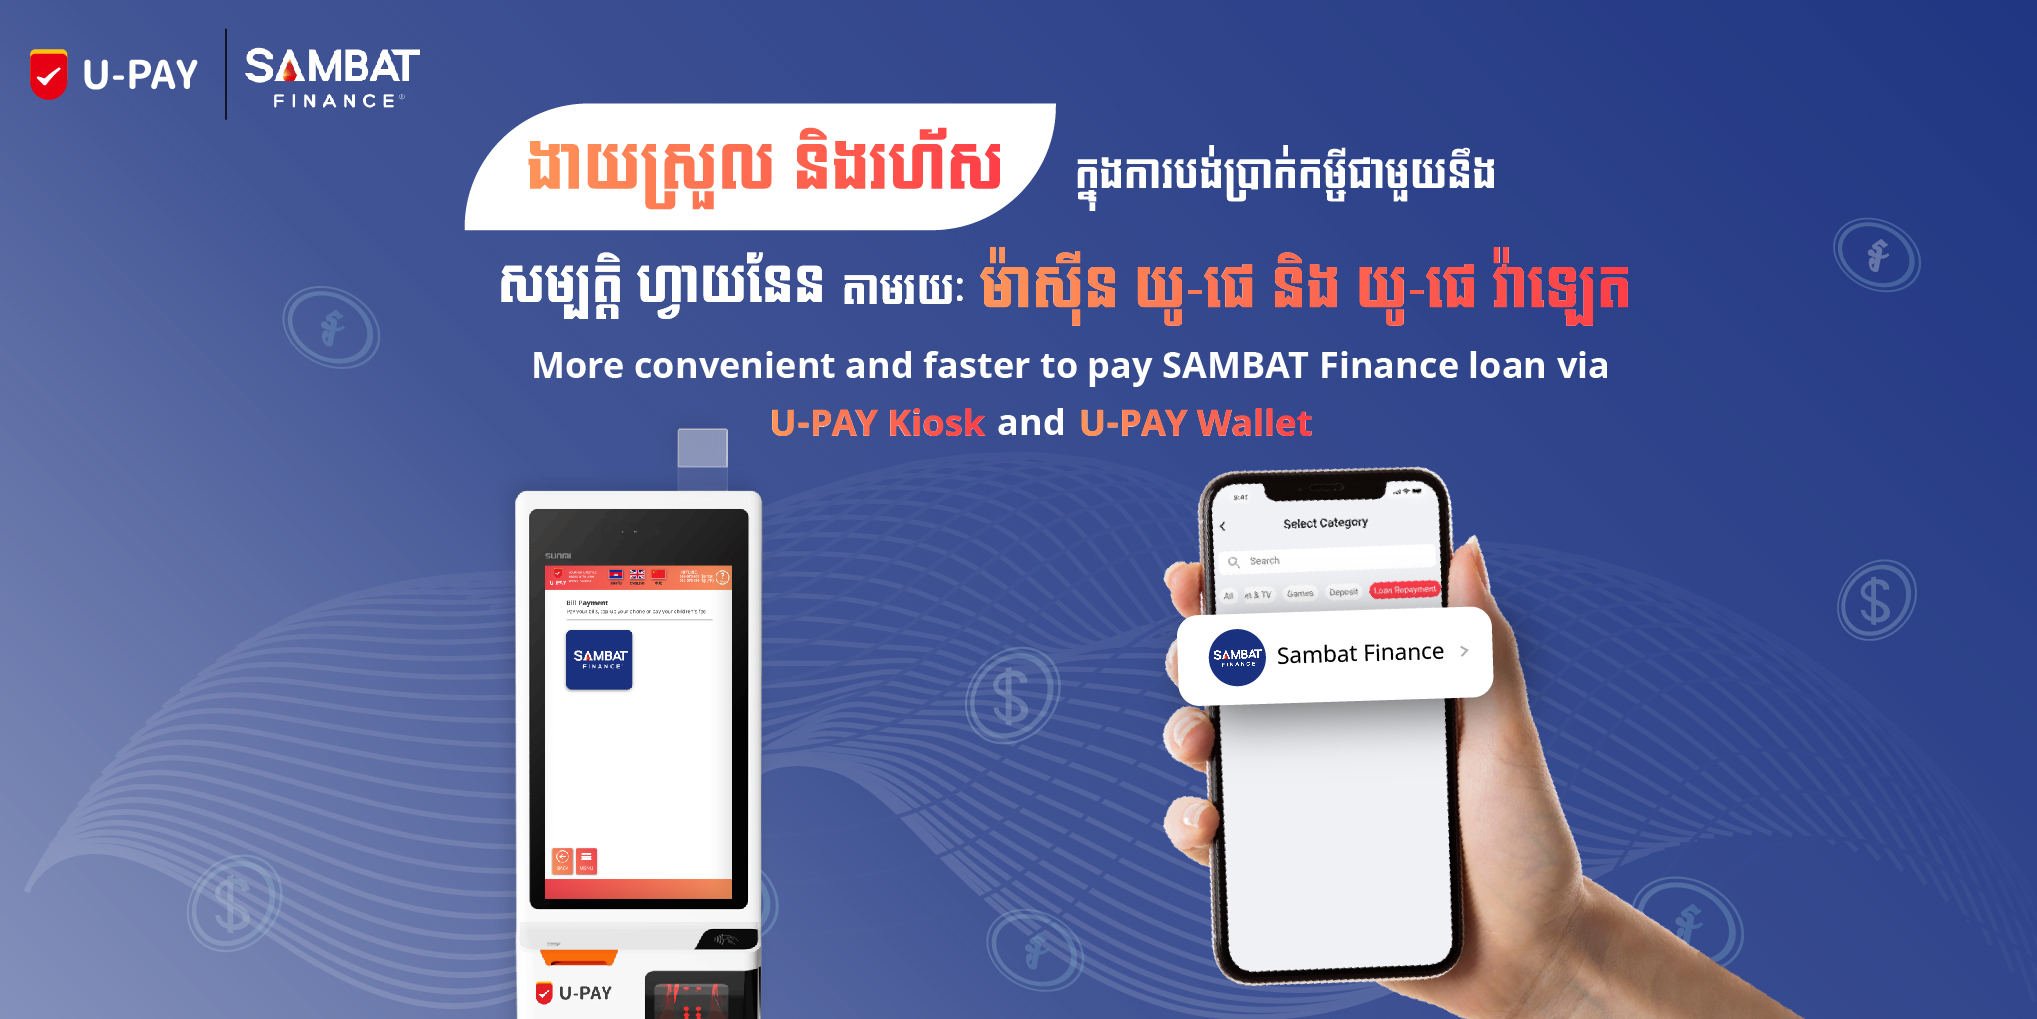 SAMBAT Finance is now connected to U-Pay Kiosk and U-Pay Wallet